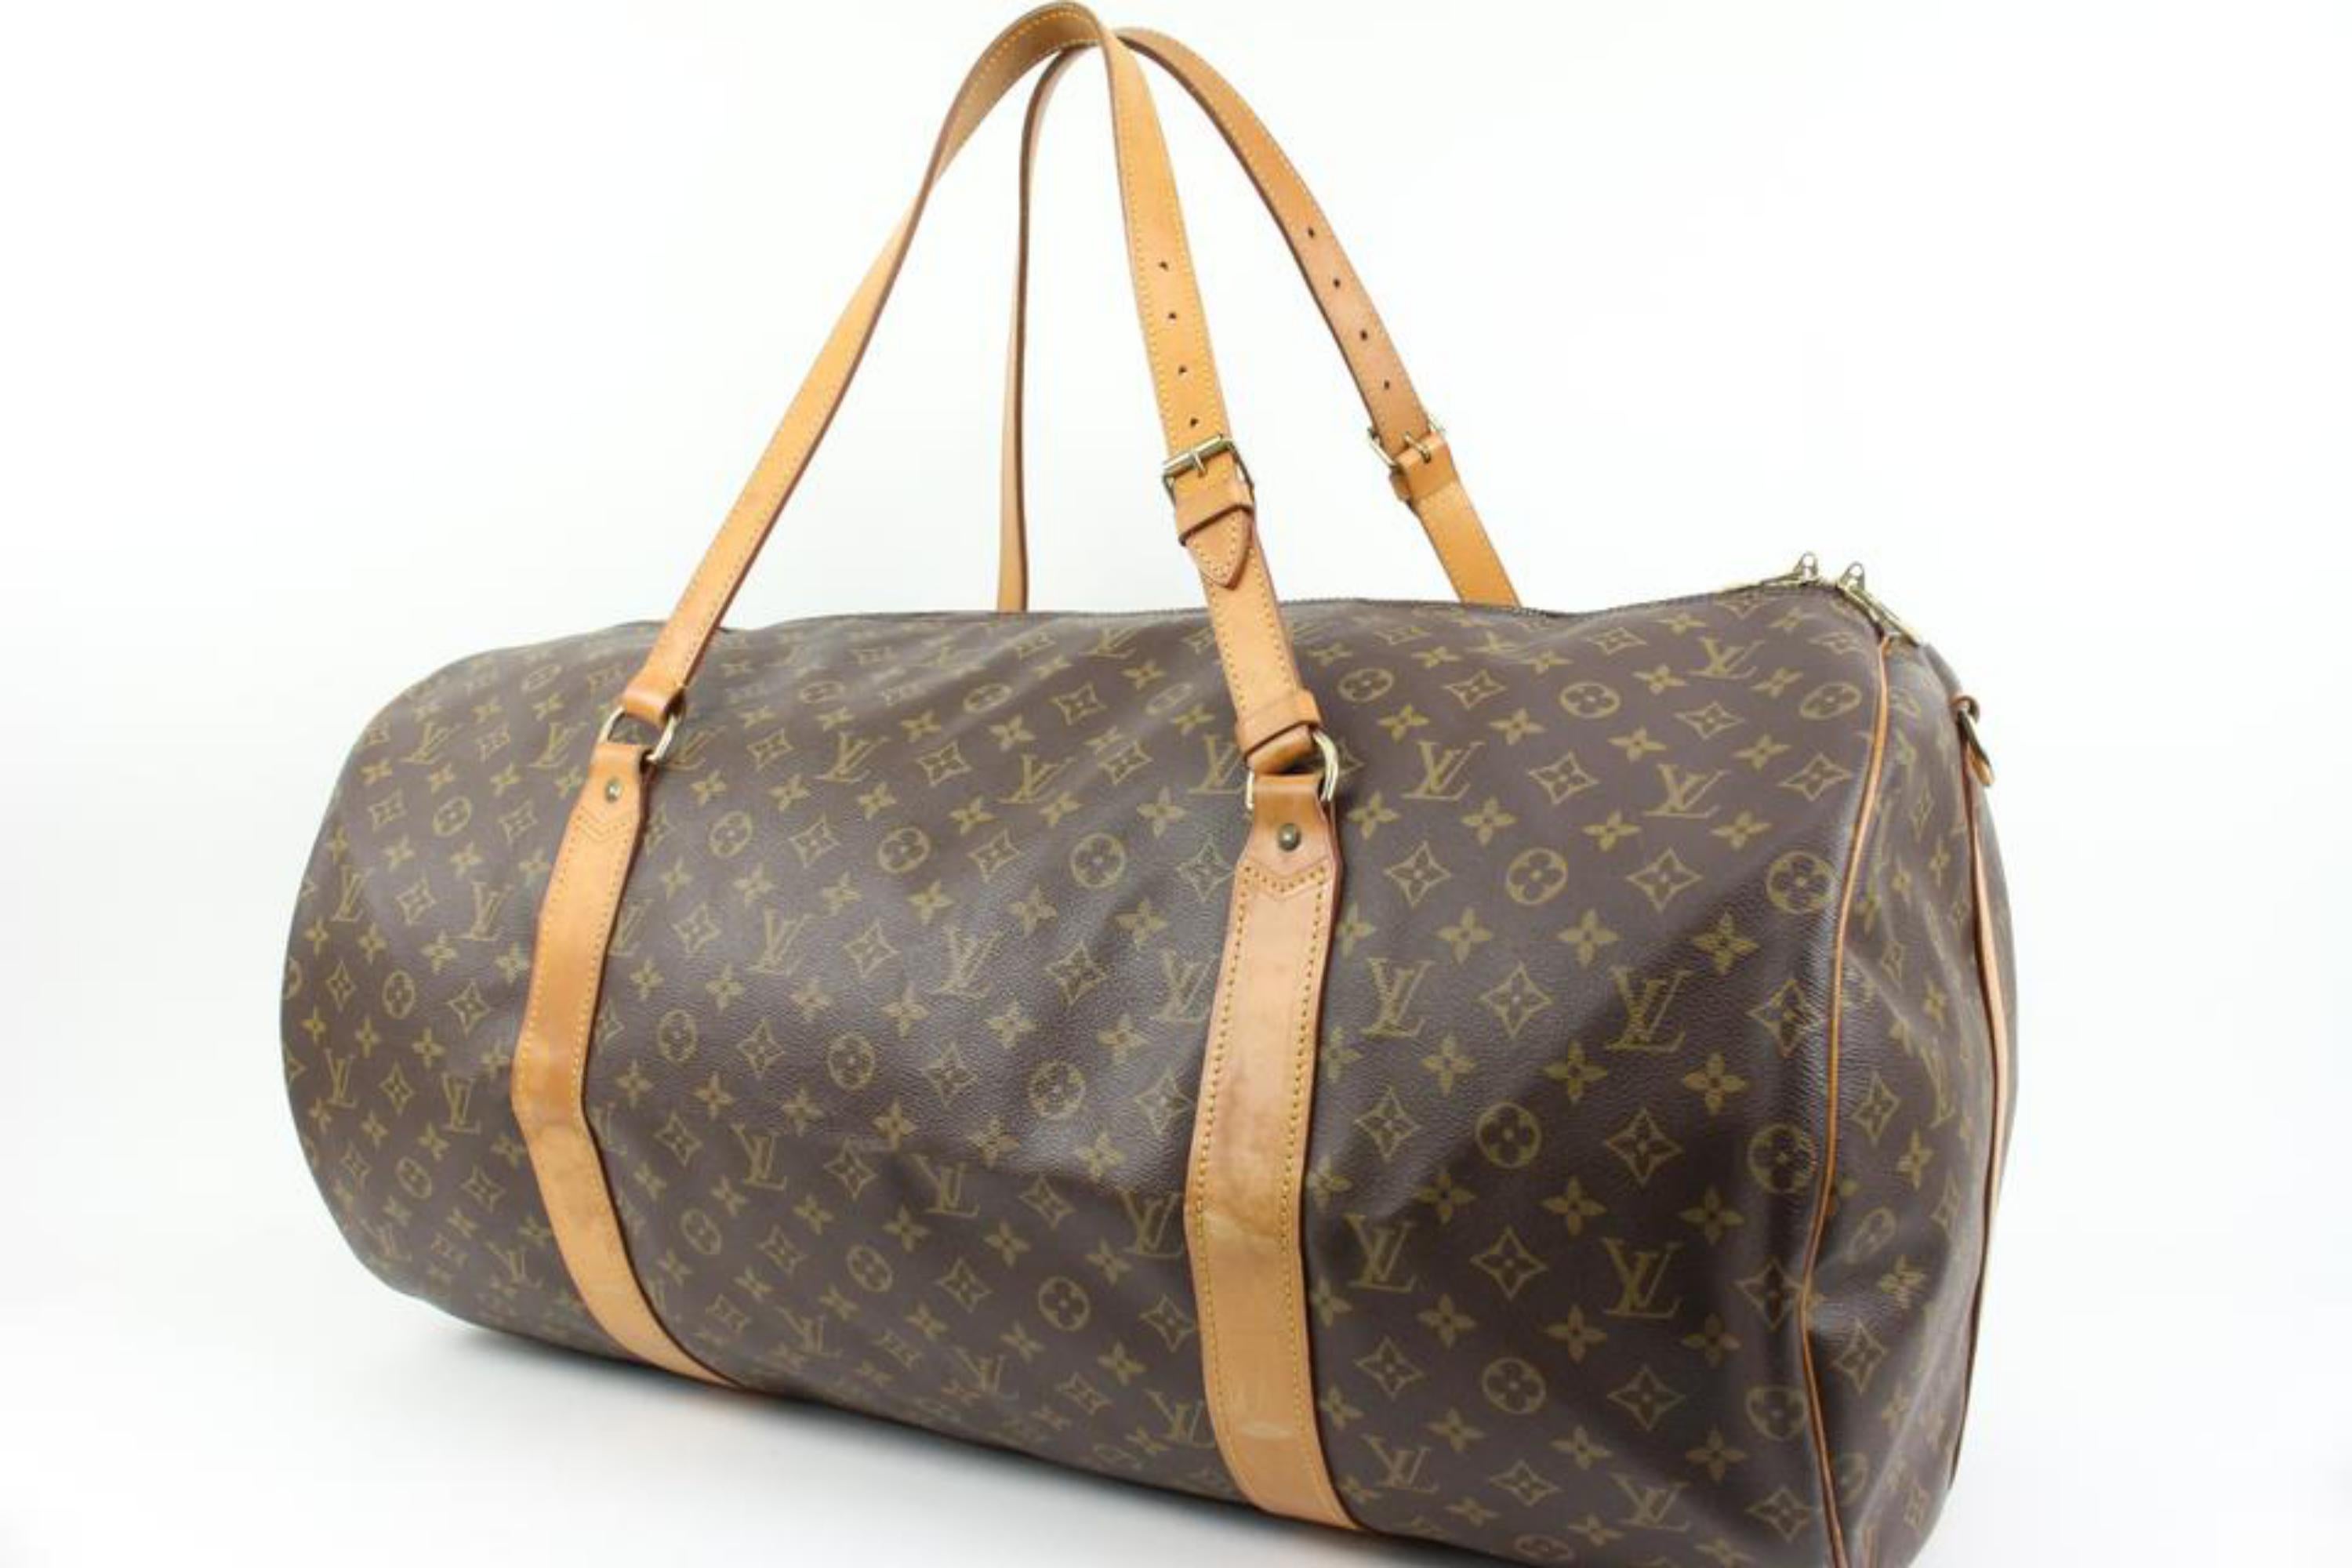 Louis Vuitton XL Monogram Sac Polochon 70 Bigger Keepall  s329lk18
Date Code/Serial Number: A10954
Made In: France
Measurements: Length:  26